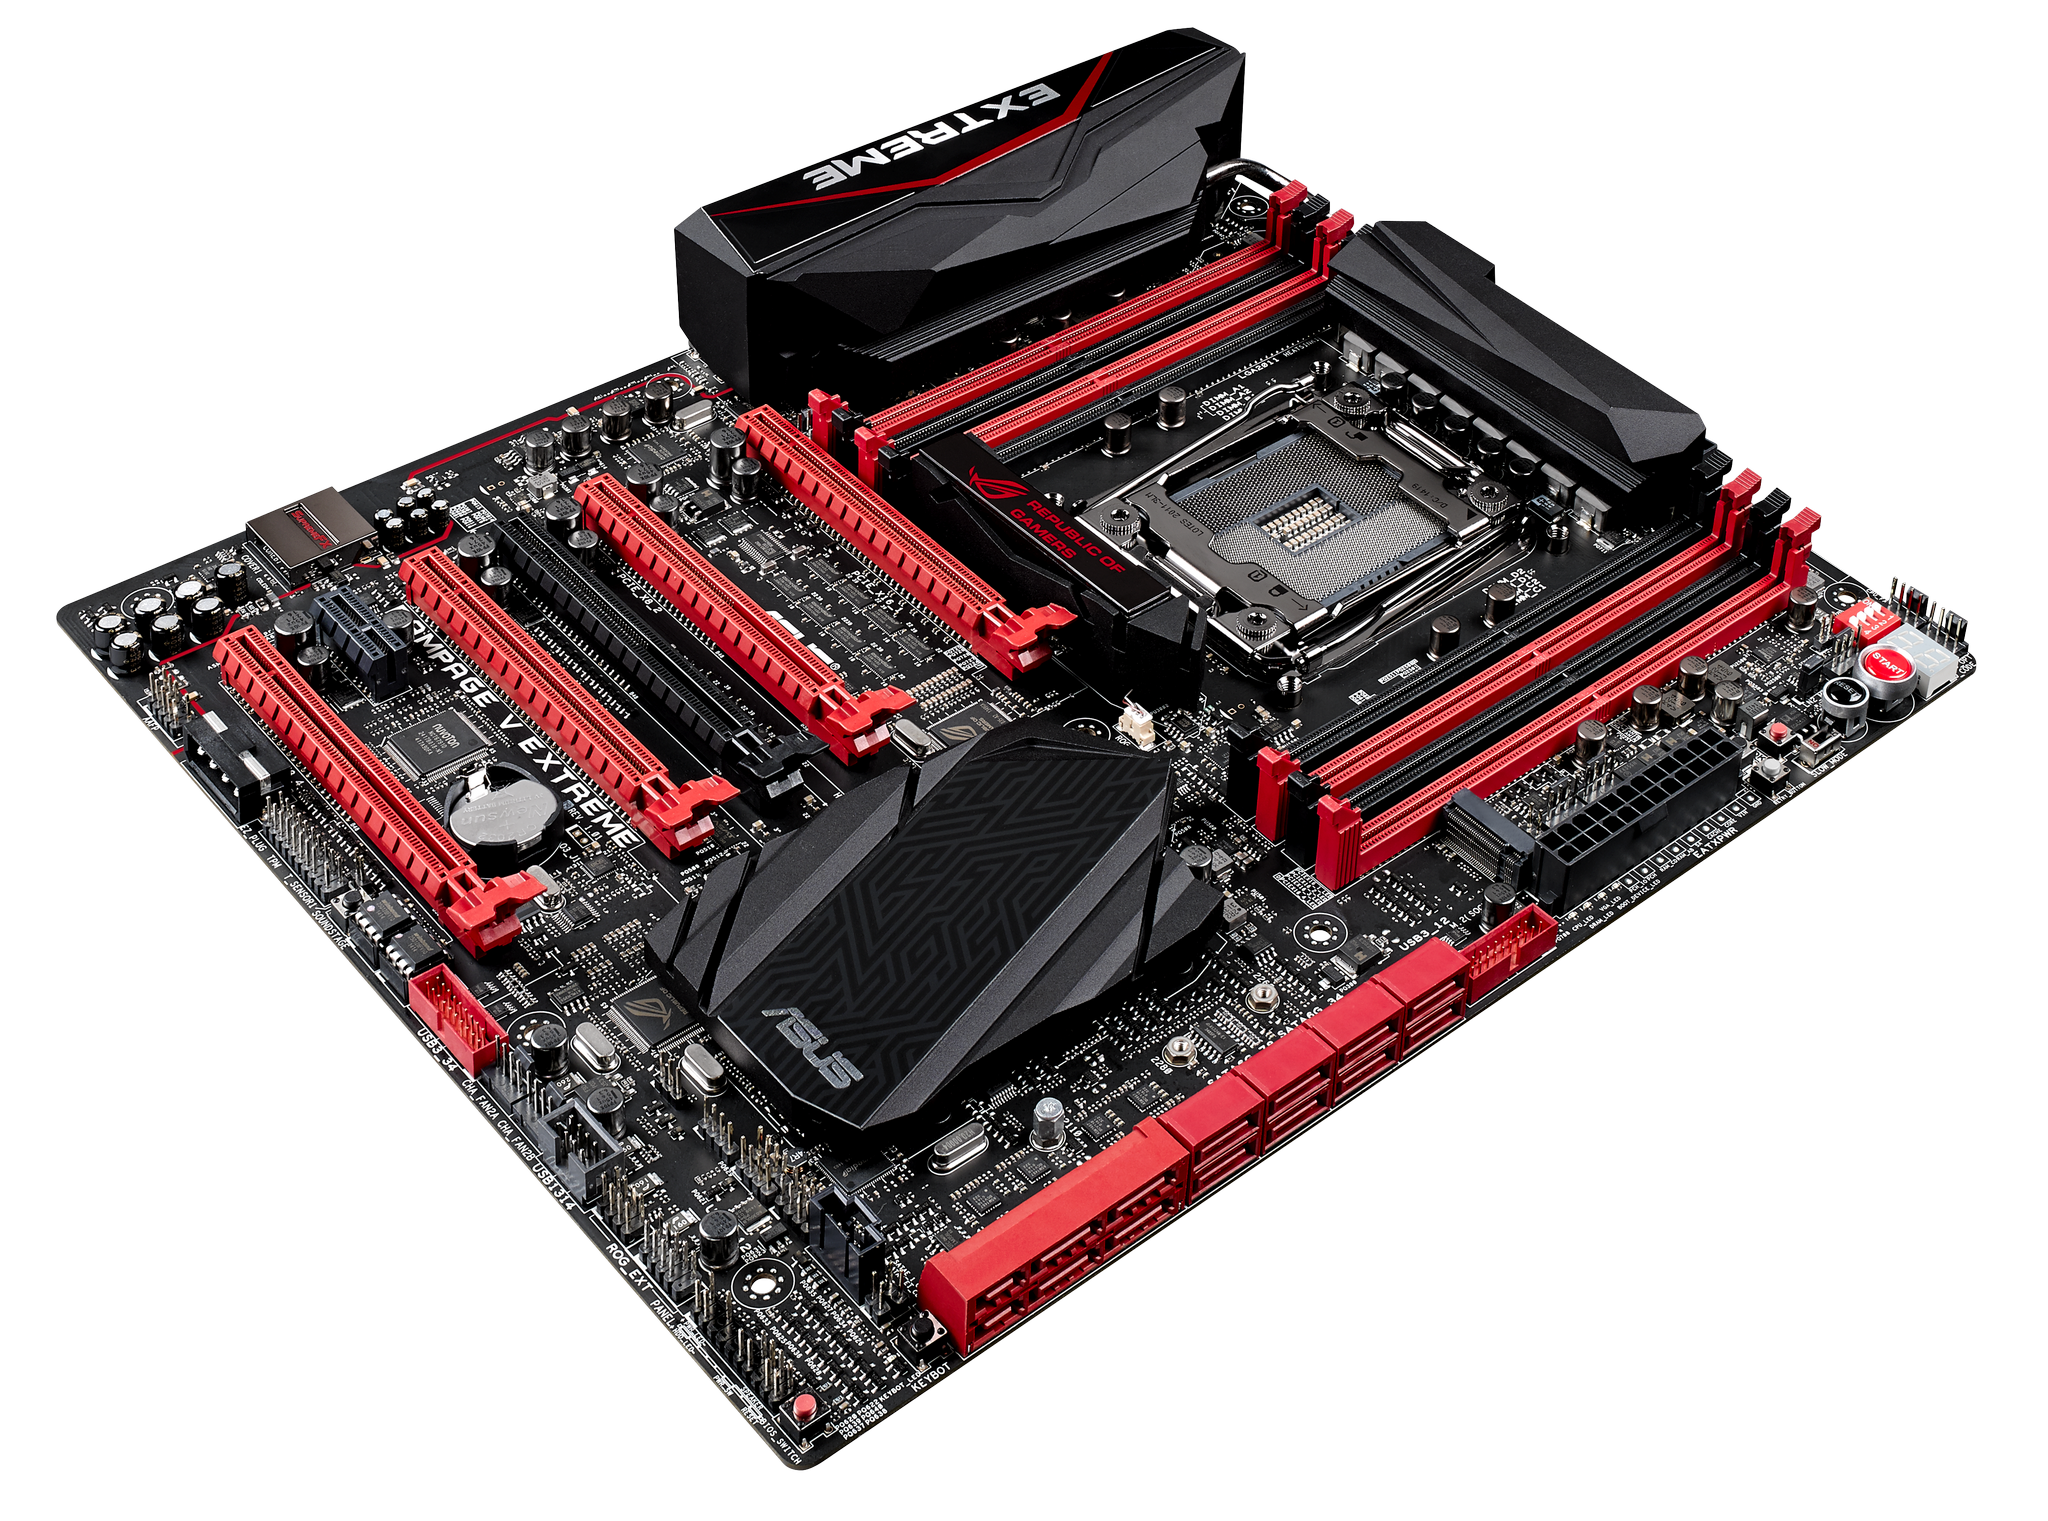 The ASUS X99 Rampage V Extreme ROG Review